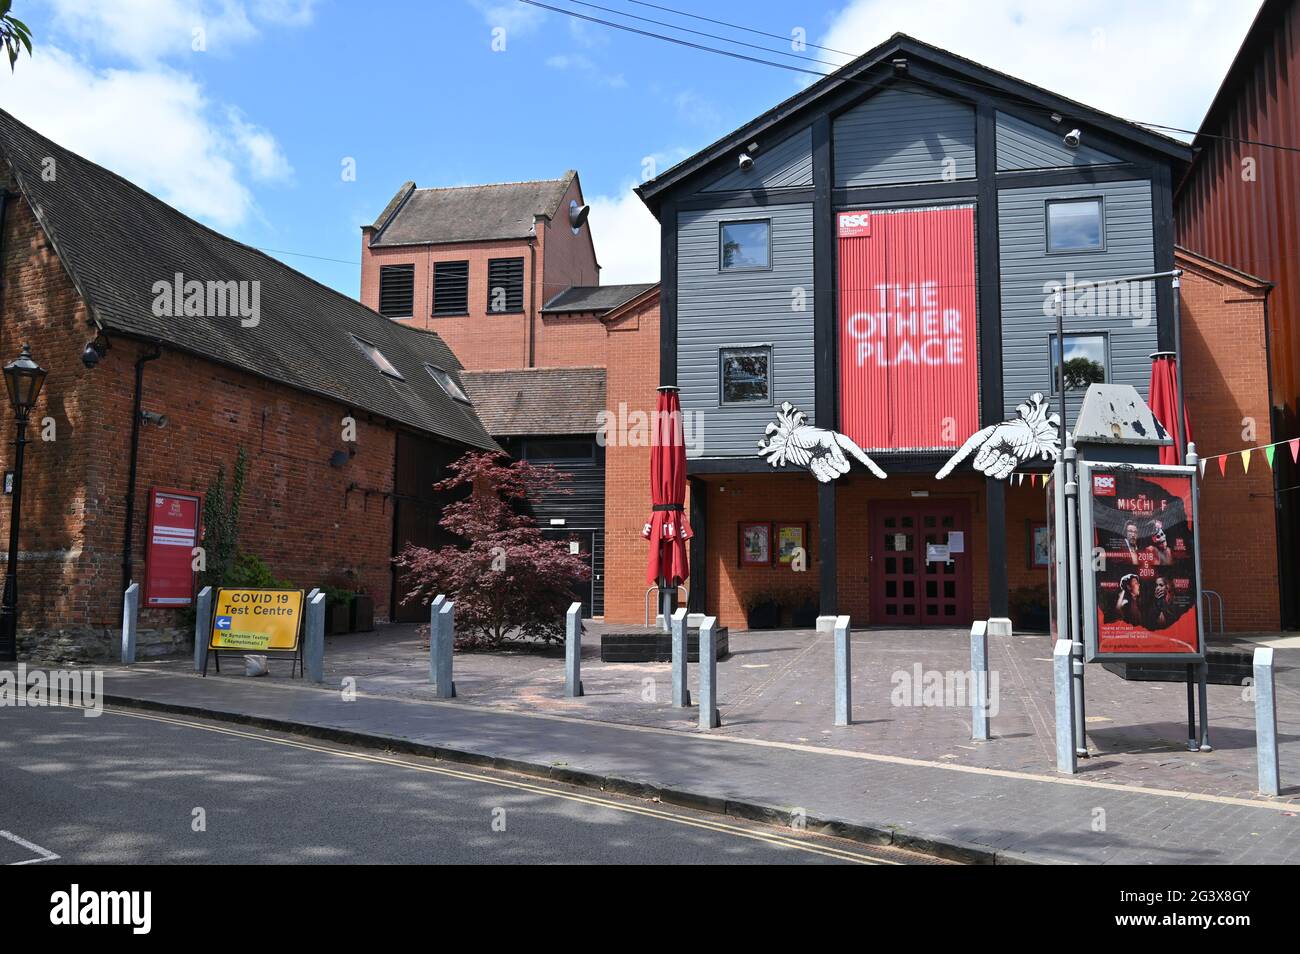 The Other Place Theatre, Waterside in the Warwickshire town of Stratford upon Avon. A sin pointing the way to a Covid-19 testing centre is on the left Stock Photo